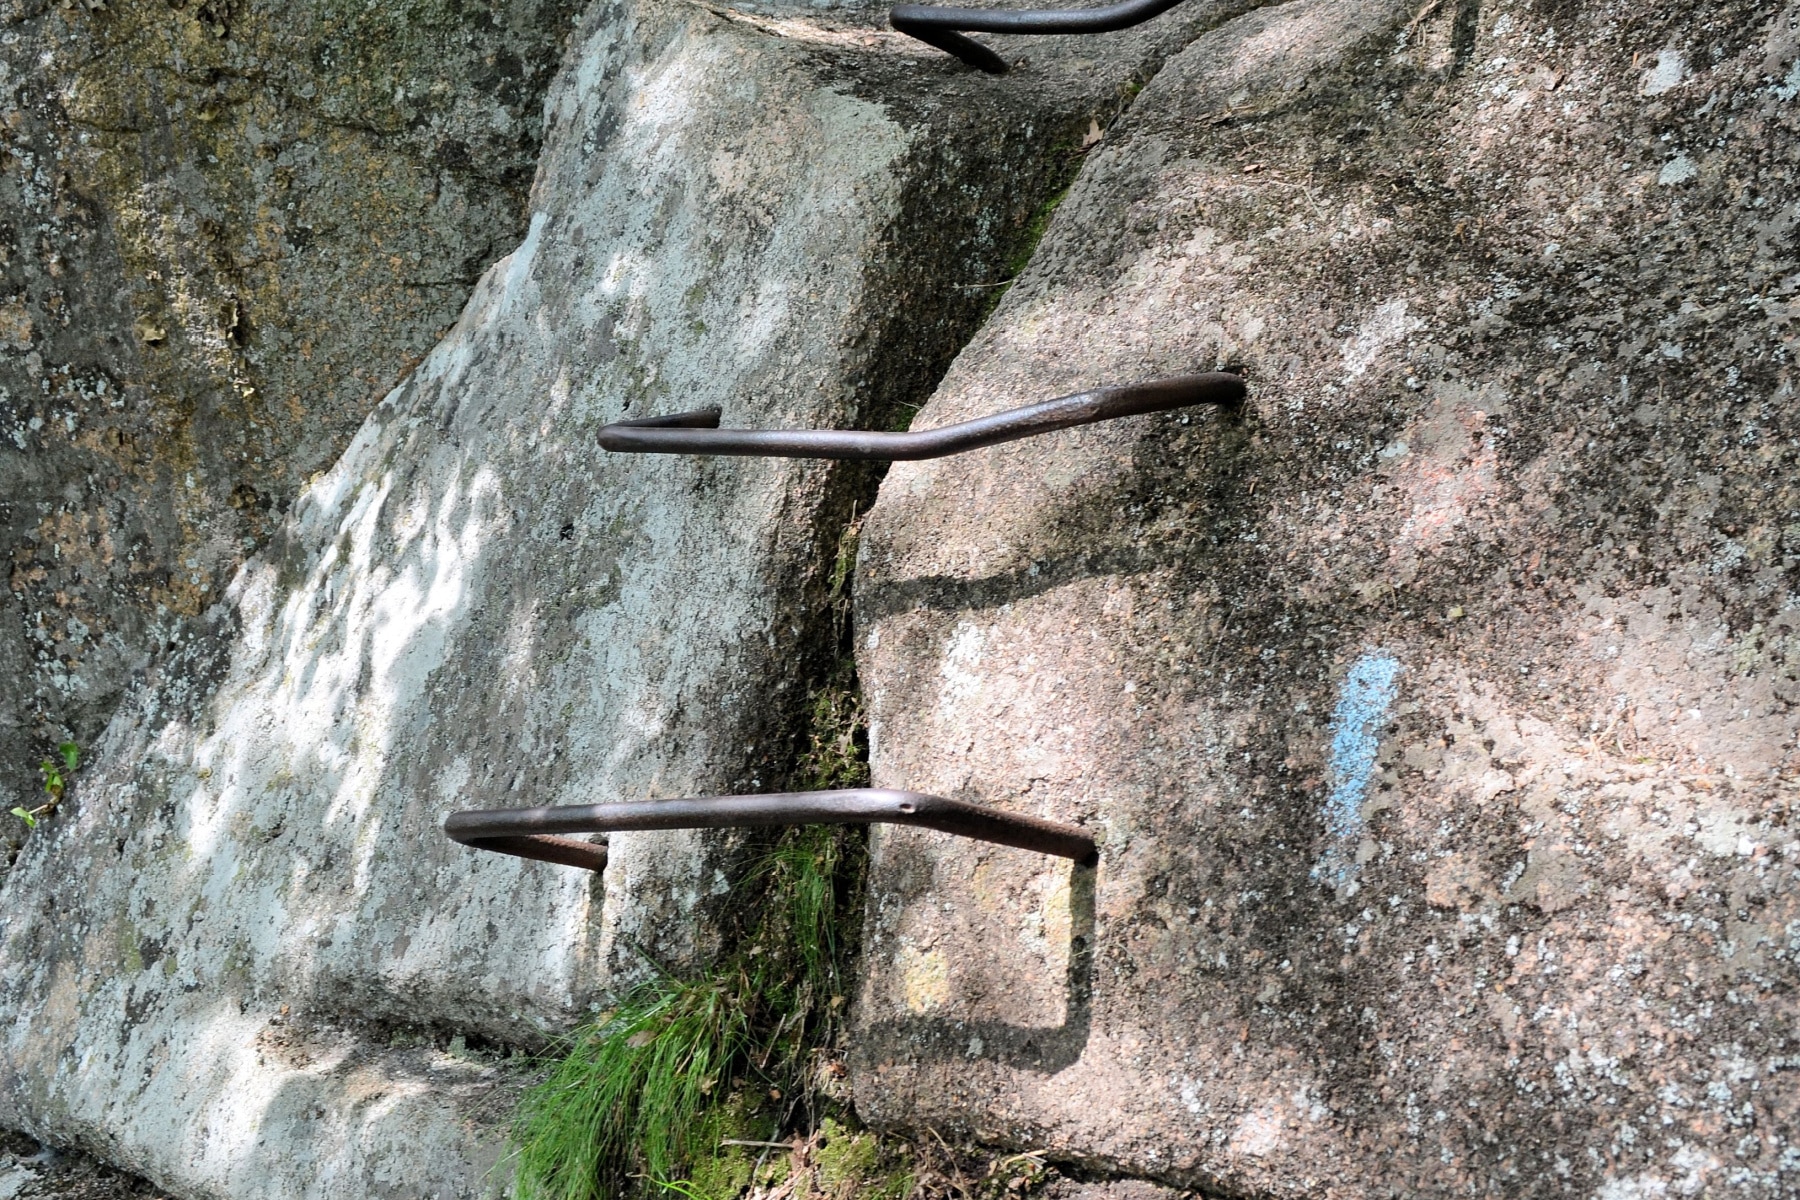 The rungs of the Precipice Trail in Acadia National Park drilled into the rocks and marked with a blue blaze.